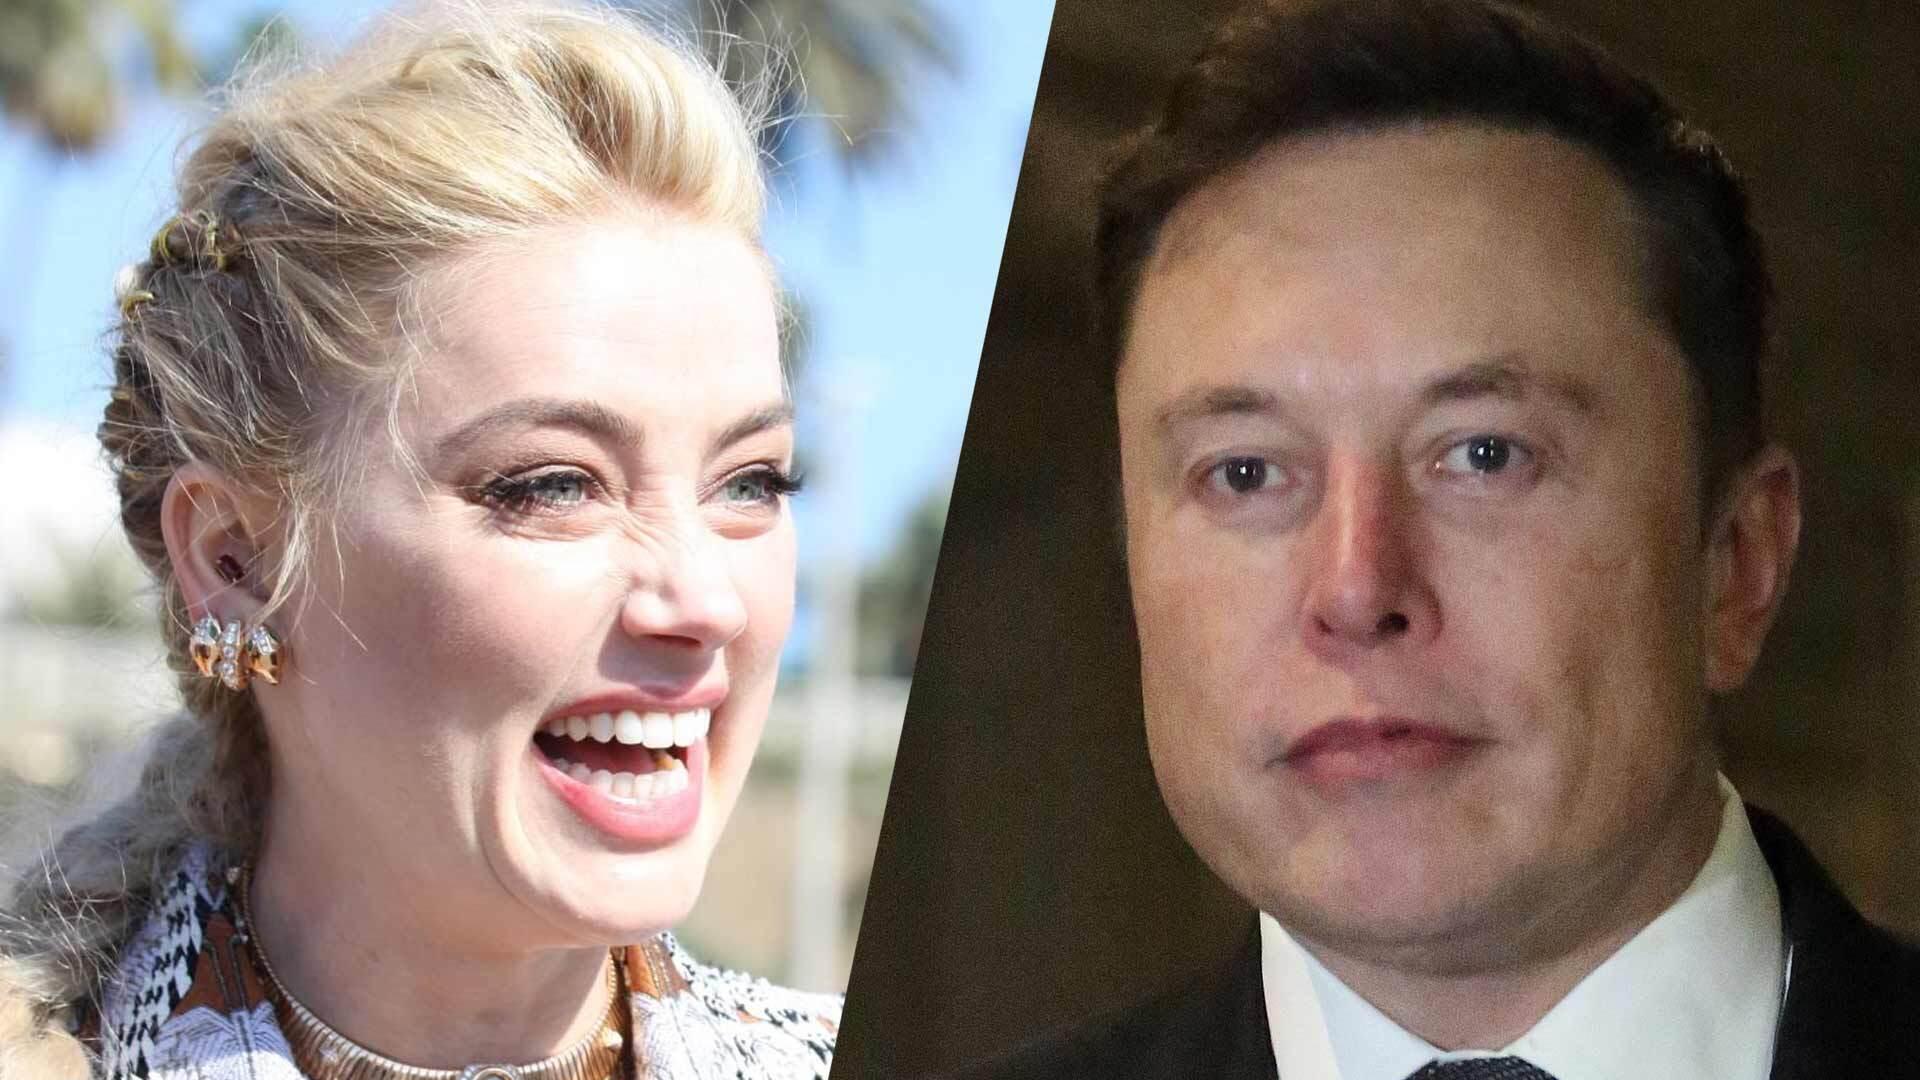 Amber Heard Texts With Elon Musk Exposed! — SpaceX Boss Tells Actress “I Really Like You”